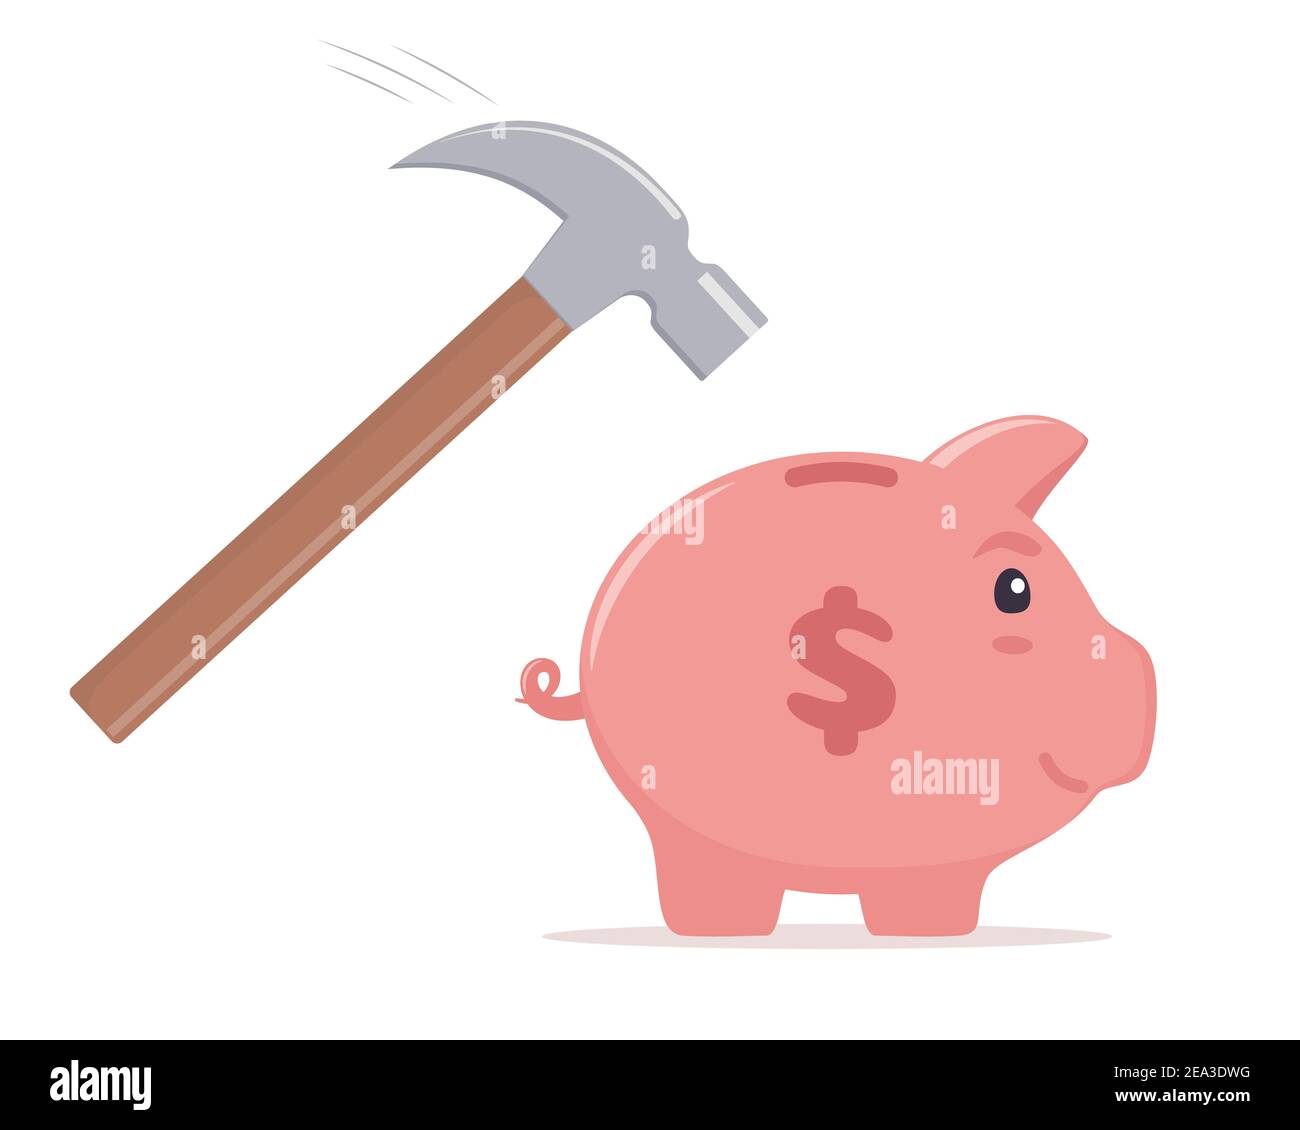 Hammer going to break the piggy bank. Money saving, economy, investment, banking or business services concept. Profit, income, earnings, budget, fund. Stock Vector